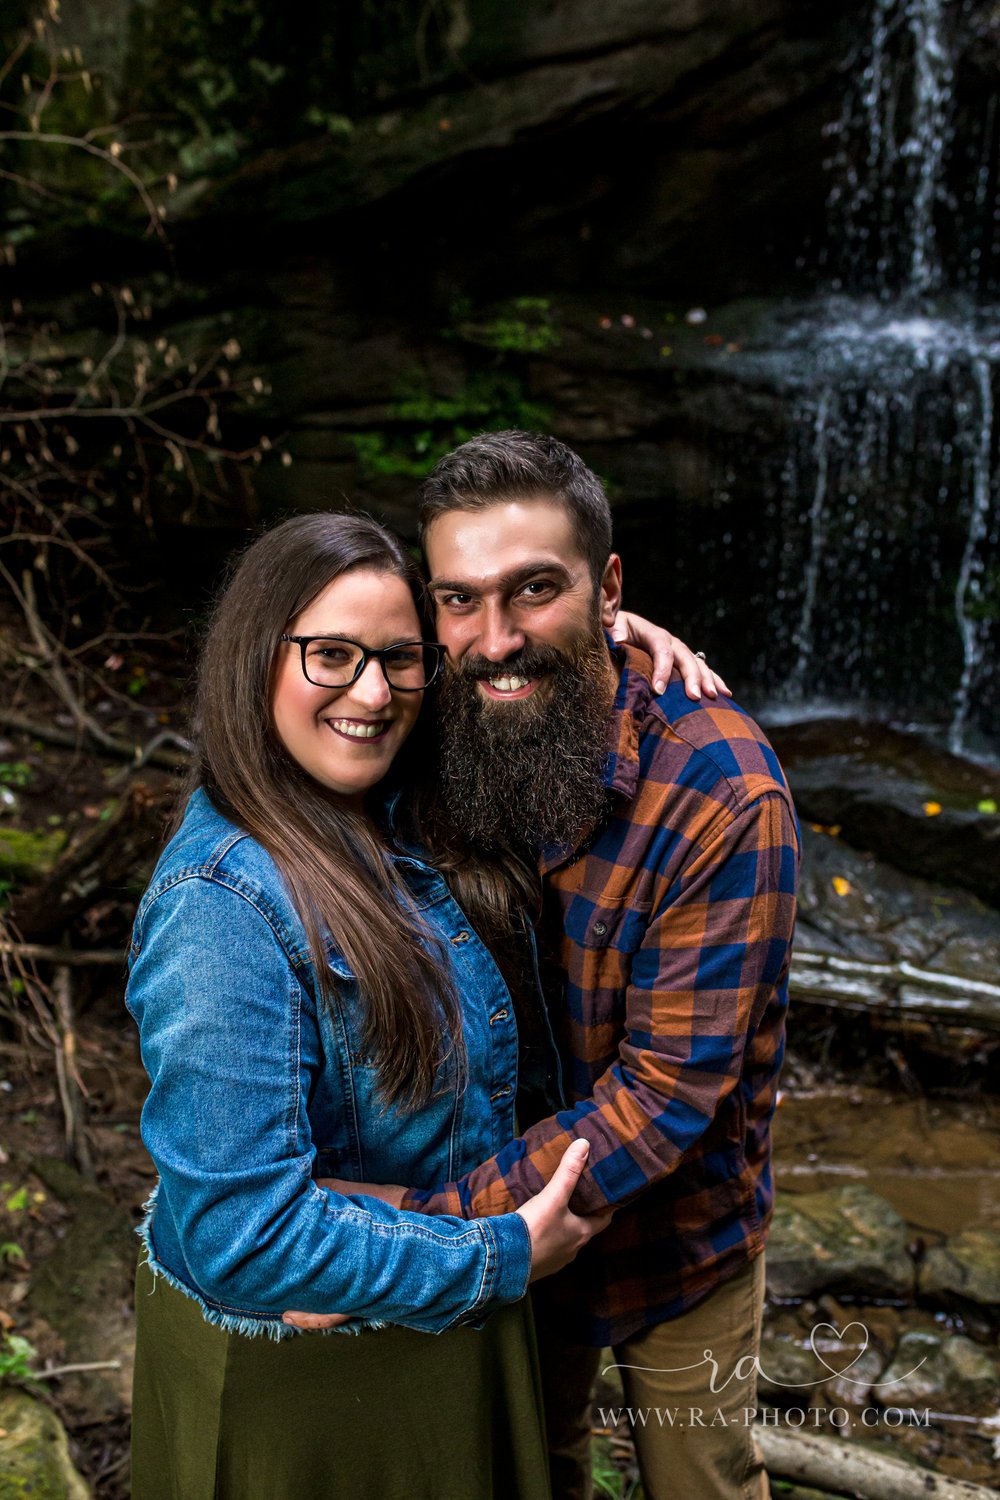 021-MGS-FALLS-CREEK-PA-ENGAGEMENT-PICTURES.jpg